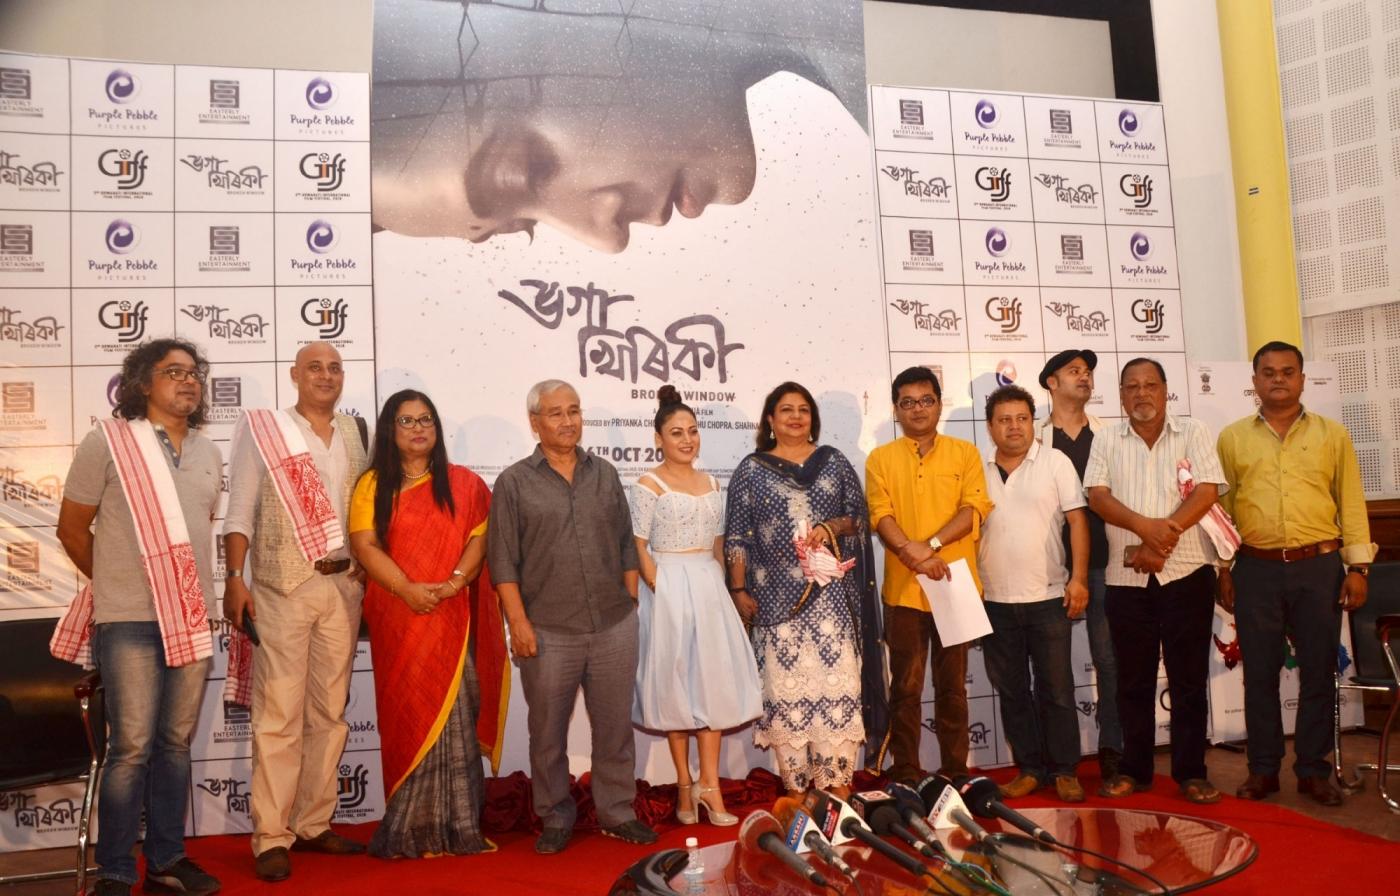 Guwahati: Director Jahnu Barua, Jyoti Chitraban Chairman Pabitra Margherita GIFF Festival Director Monita Borgohain, producers Madhu Chopra and Alam Barua, actress Zerifa Wahid, composer Ibson Lal Baruah, singer Anindita Paul and other dignitaries at a press conference during the poster launch of "Bhoga Khirikee", in Guwahati on Sept 19, 2018. Jahnu Barua directorial "Bhoga Khirikee", the first Assamese movie to be produced by Priyanka Chopra's banner, will release on October 26. The movie will also open the second edition of the Guwahati International Film Festival (GIFF) at the Srimanta Sankaradeva Kalakshetra on October 25. (Photo: IANS) by .